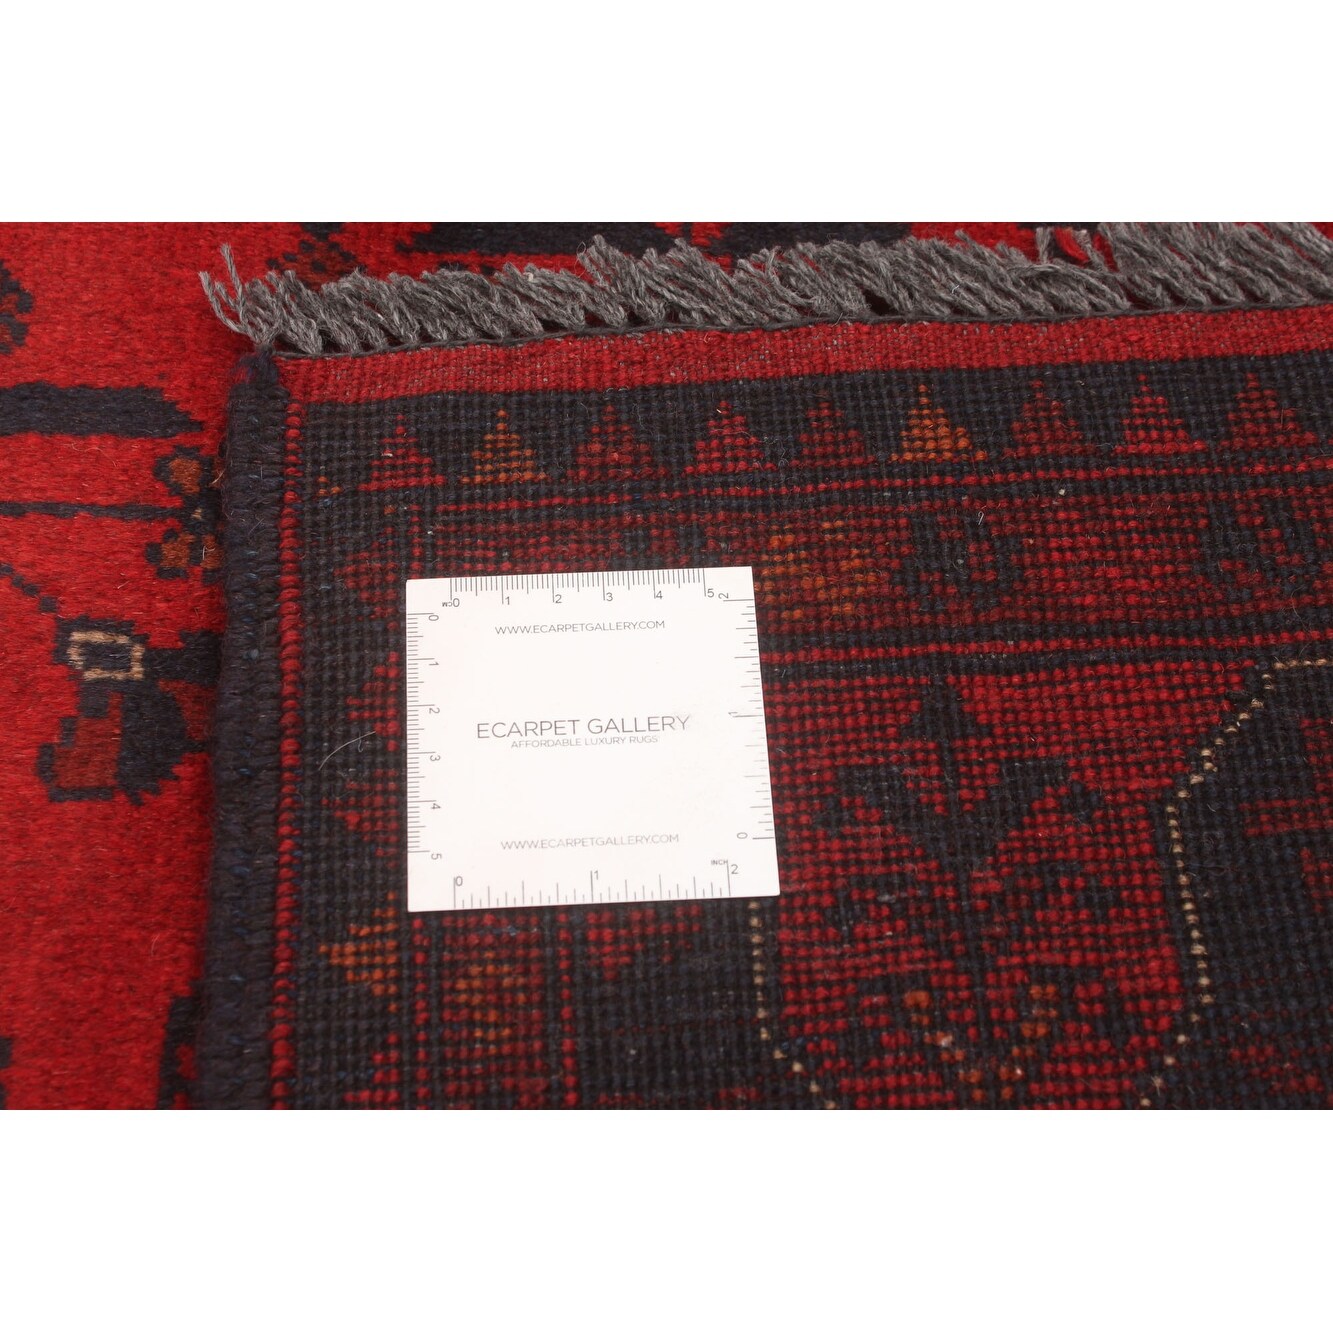 328692 Hand-Knotted Wool Rug Bedroom eCarpet Gallery Area Rug for Living Room Finest Khal Mohammadi Bordered Red Rug 4'3 x 6'3 